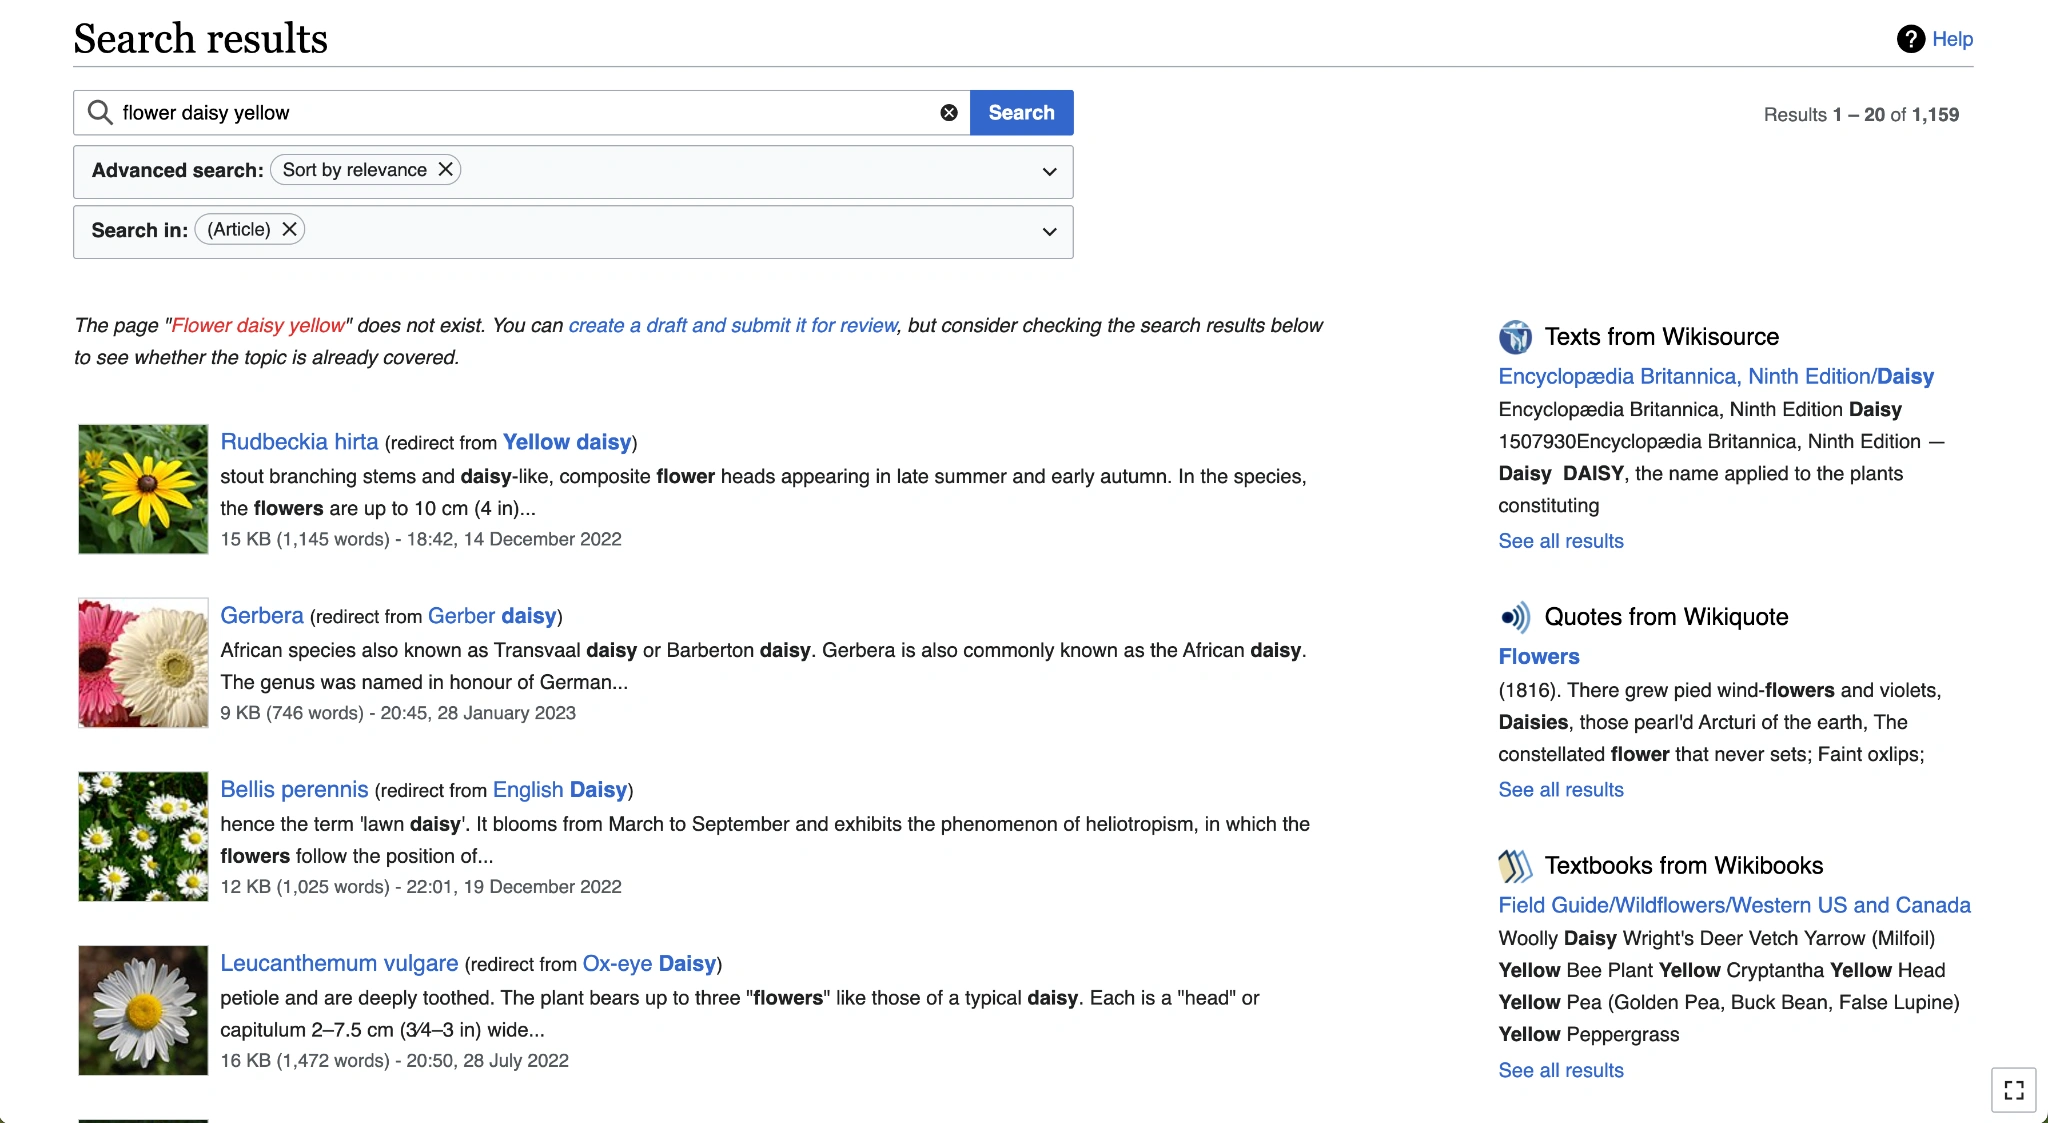 Screenshot of Wikipedia showing redesigned search page with thumbnail images